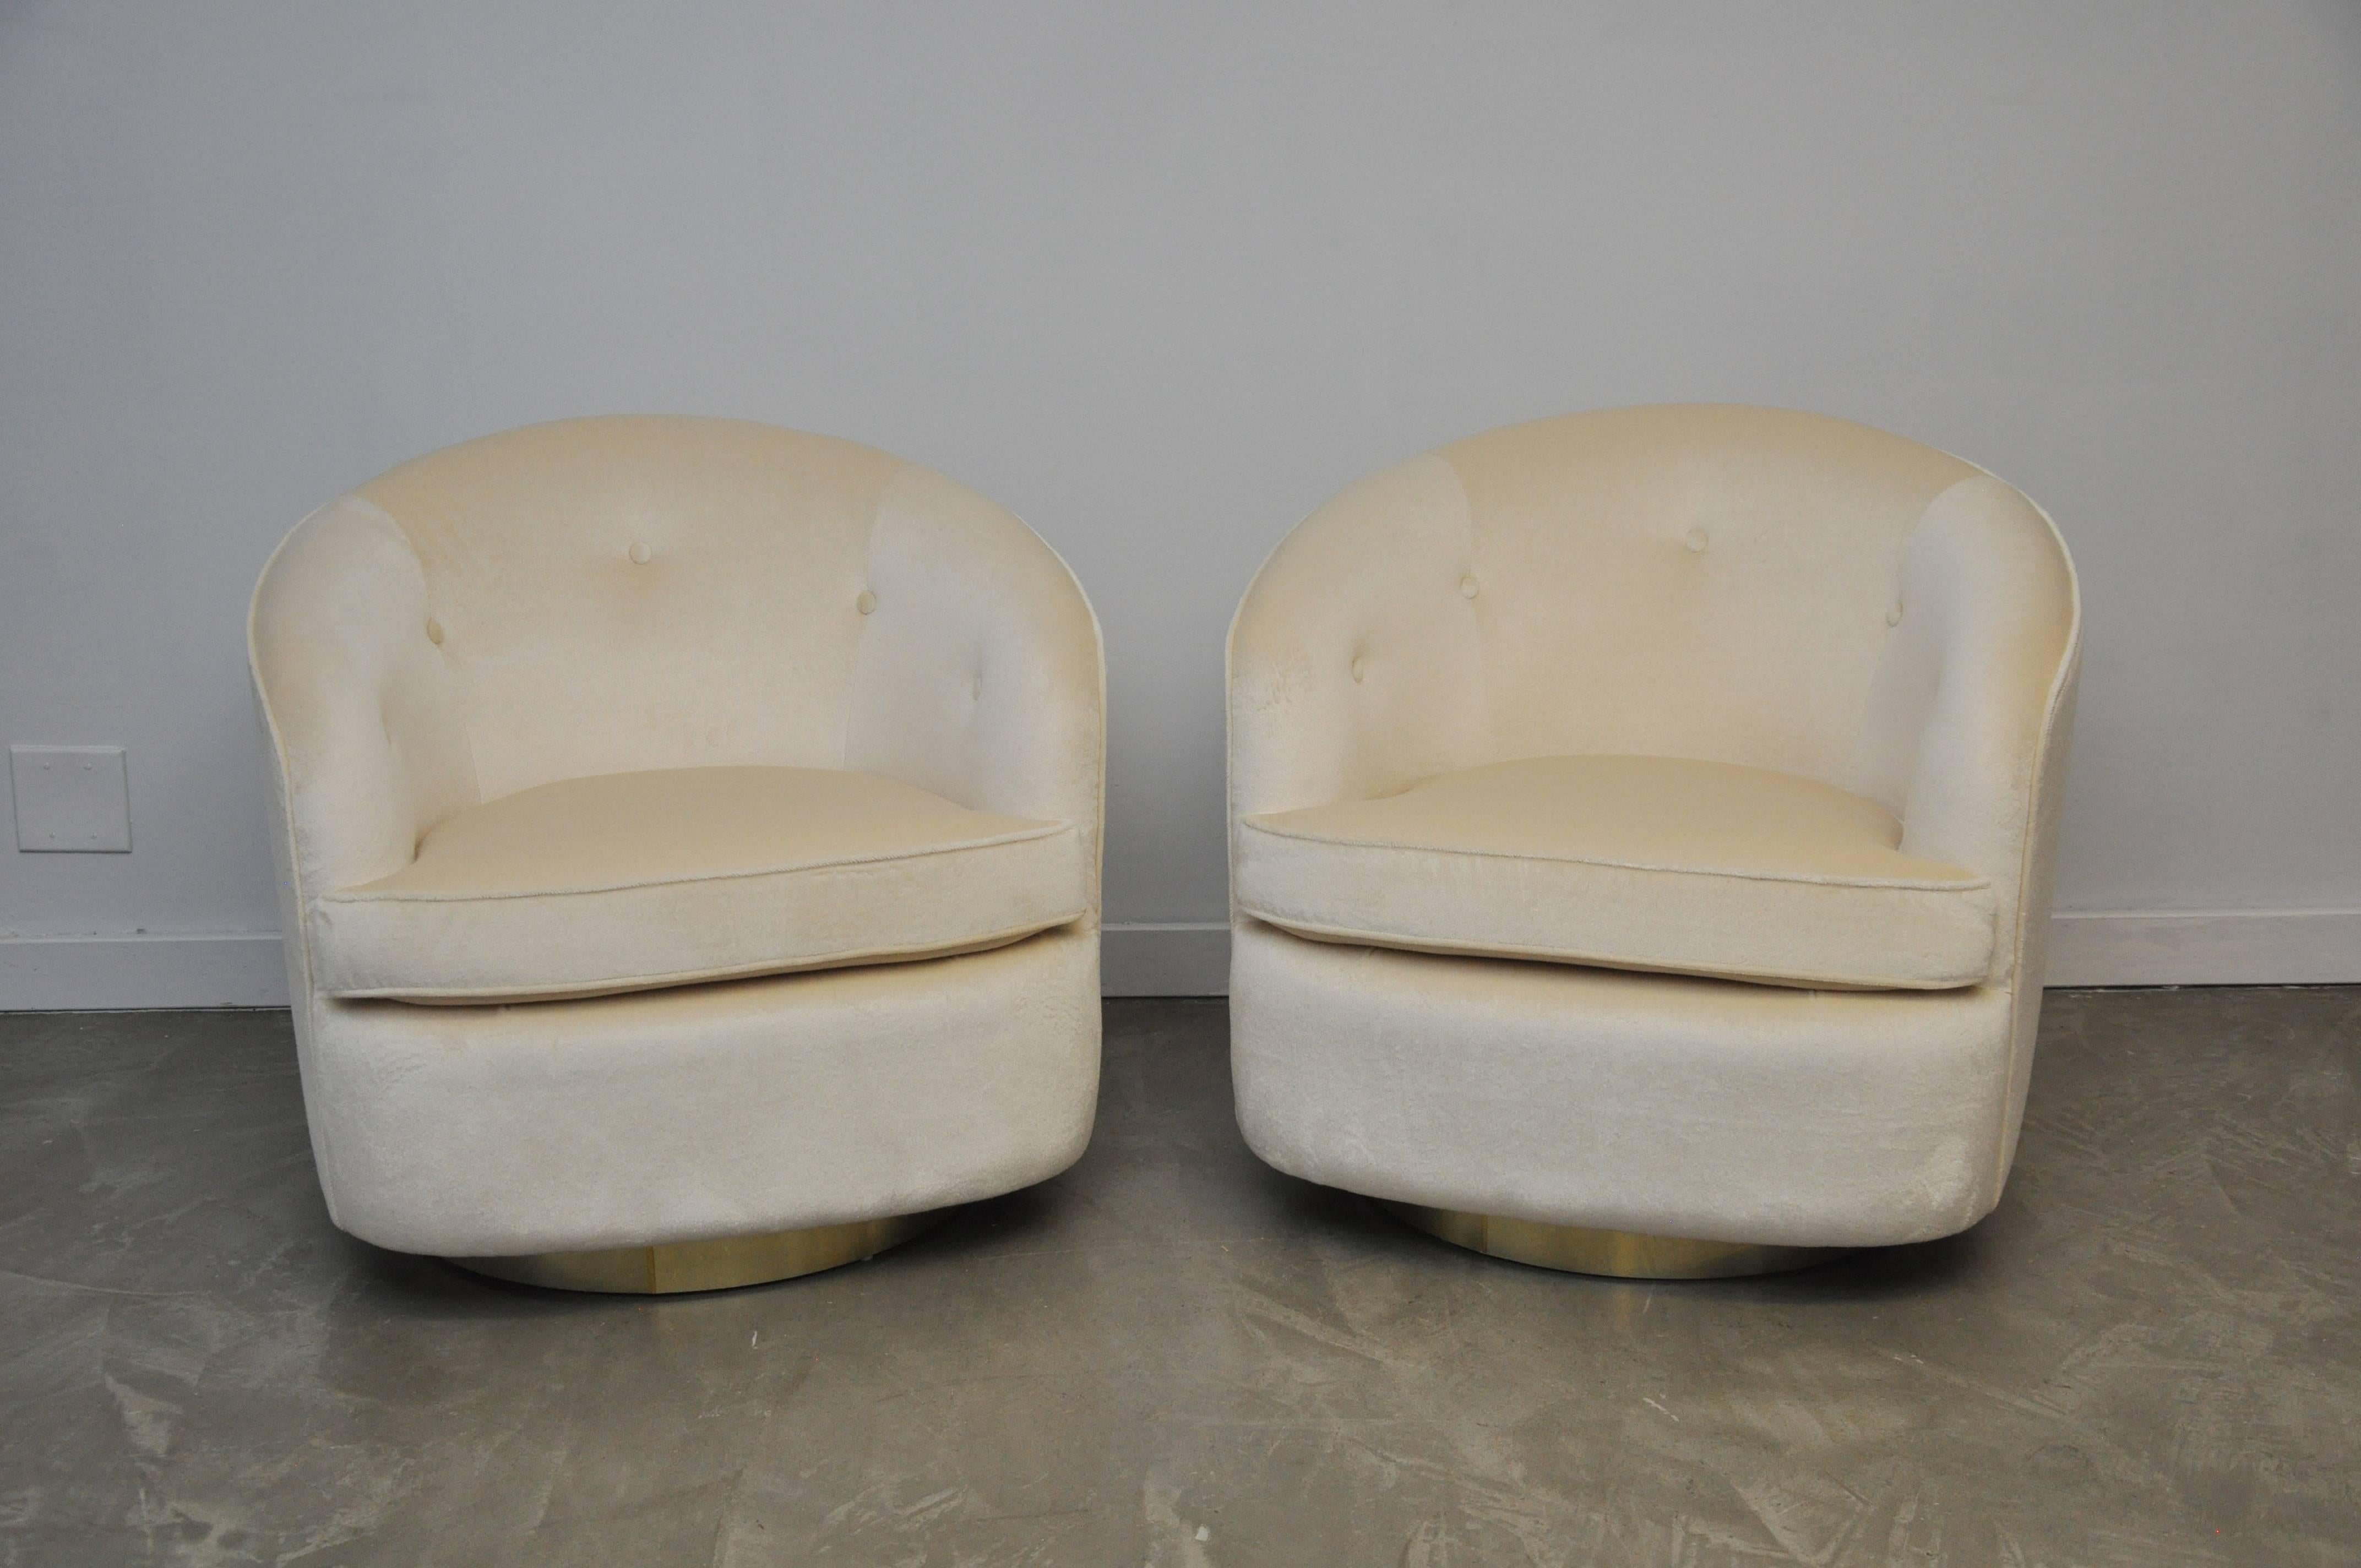 Set of four brass base swivel chairs by Milo Baughman. Fully restored and reupholstered in cream mohair.

Also available in pairs.